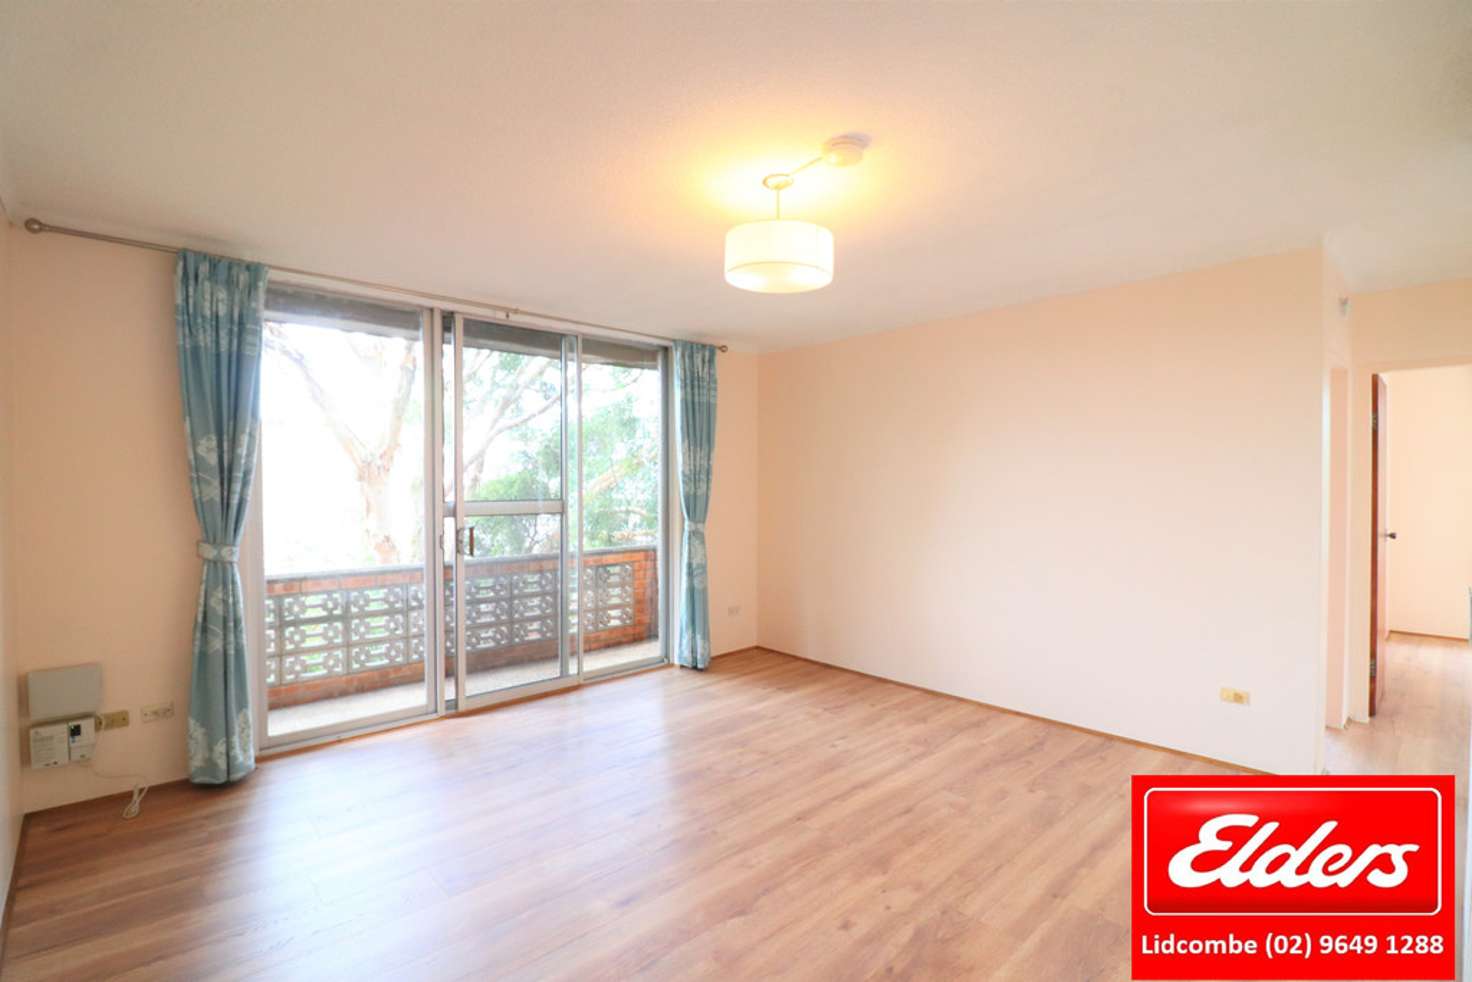 Main view of Homely apartment listing, 9/17 DOODSON AVENUE, Lidcombe NSW 2141